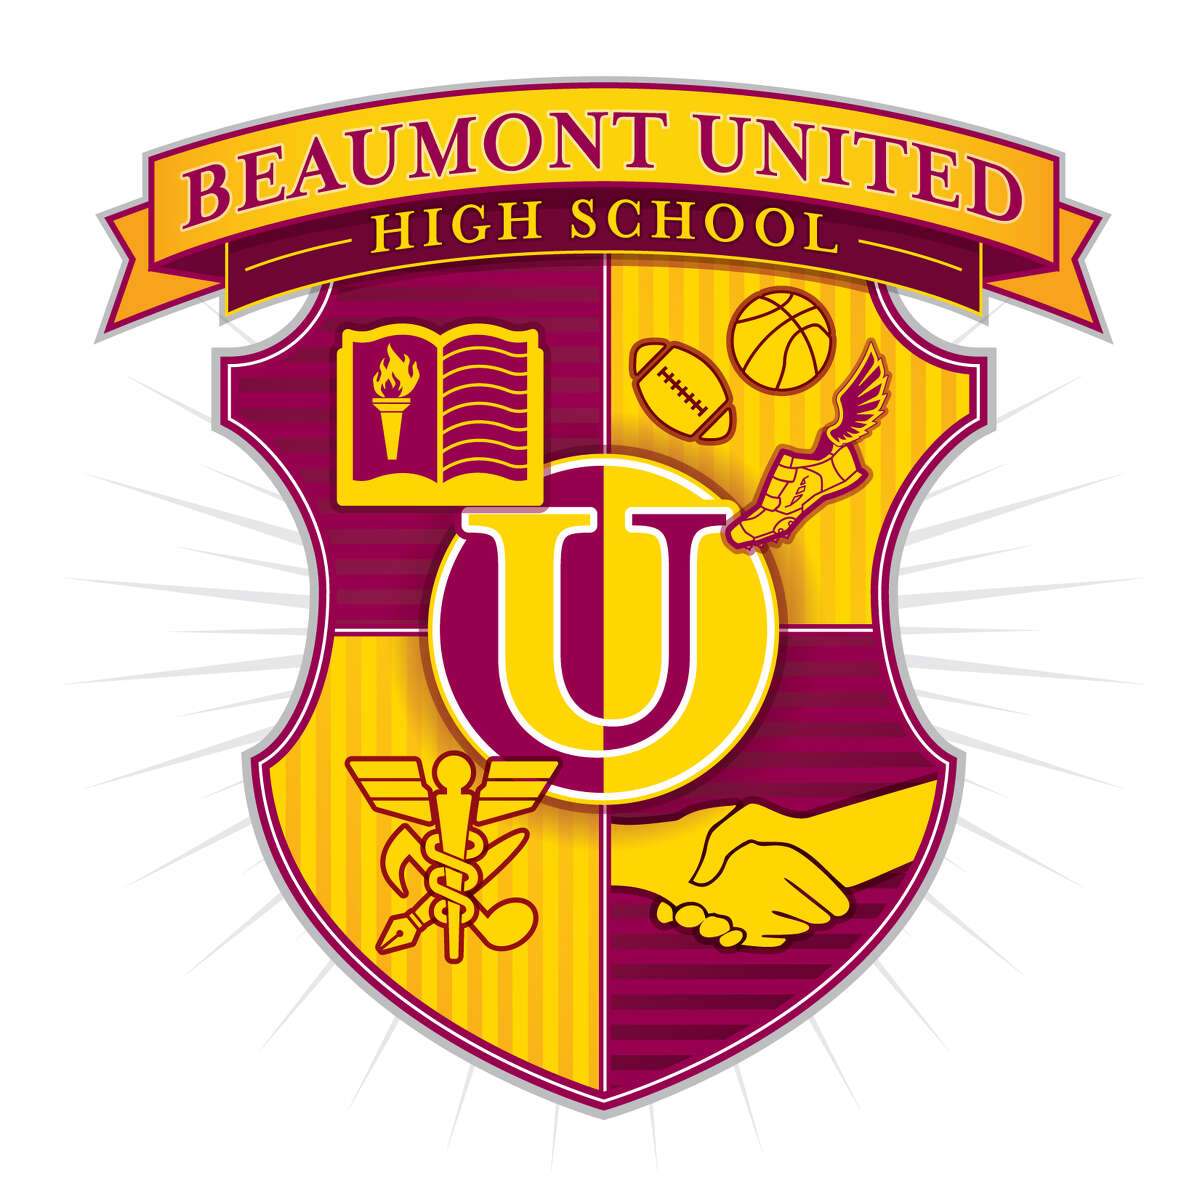 See what Beaumont United's baseball hats will look like